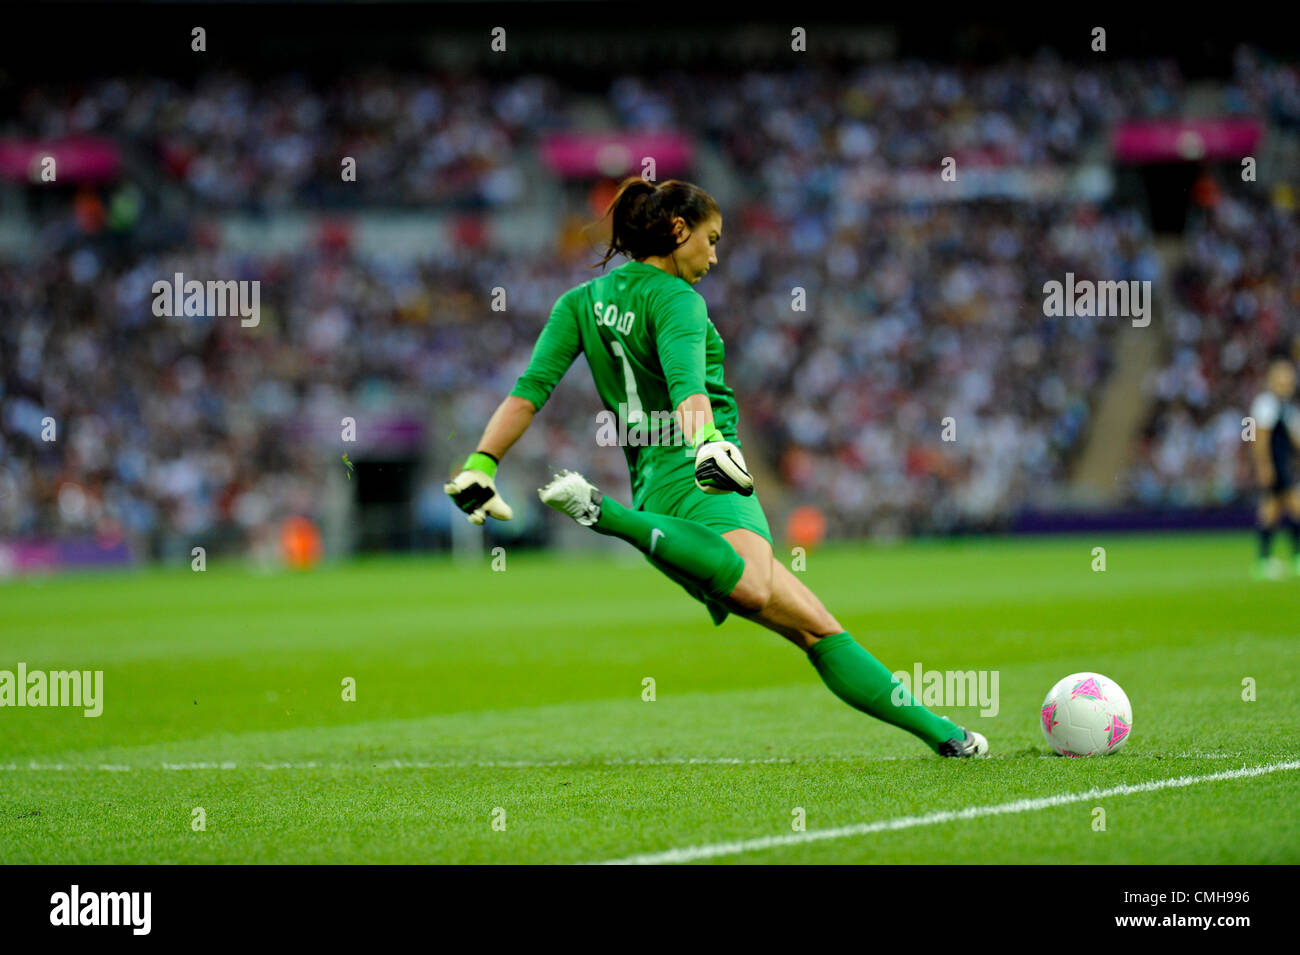 09.08.2012 London, England. USA's Hope Solo (GoalKeeper)  in action during the Olympic Women's Final  between Team USA  and Japan from Wembley Stadium. Stock Photo